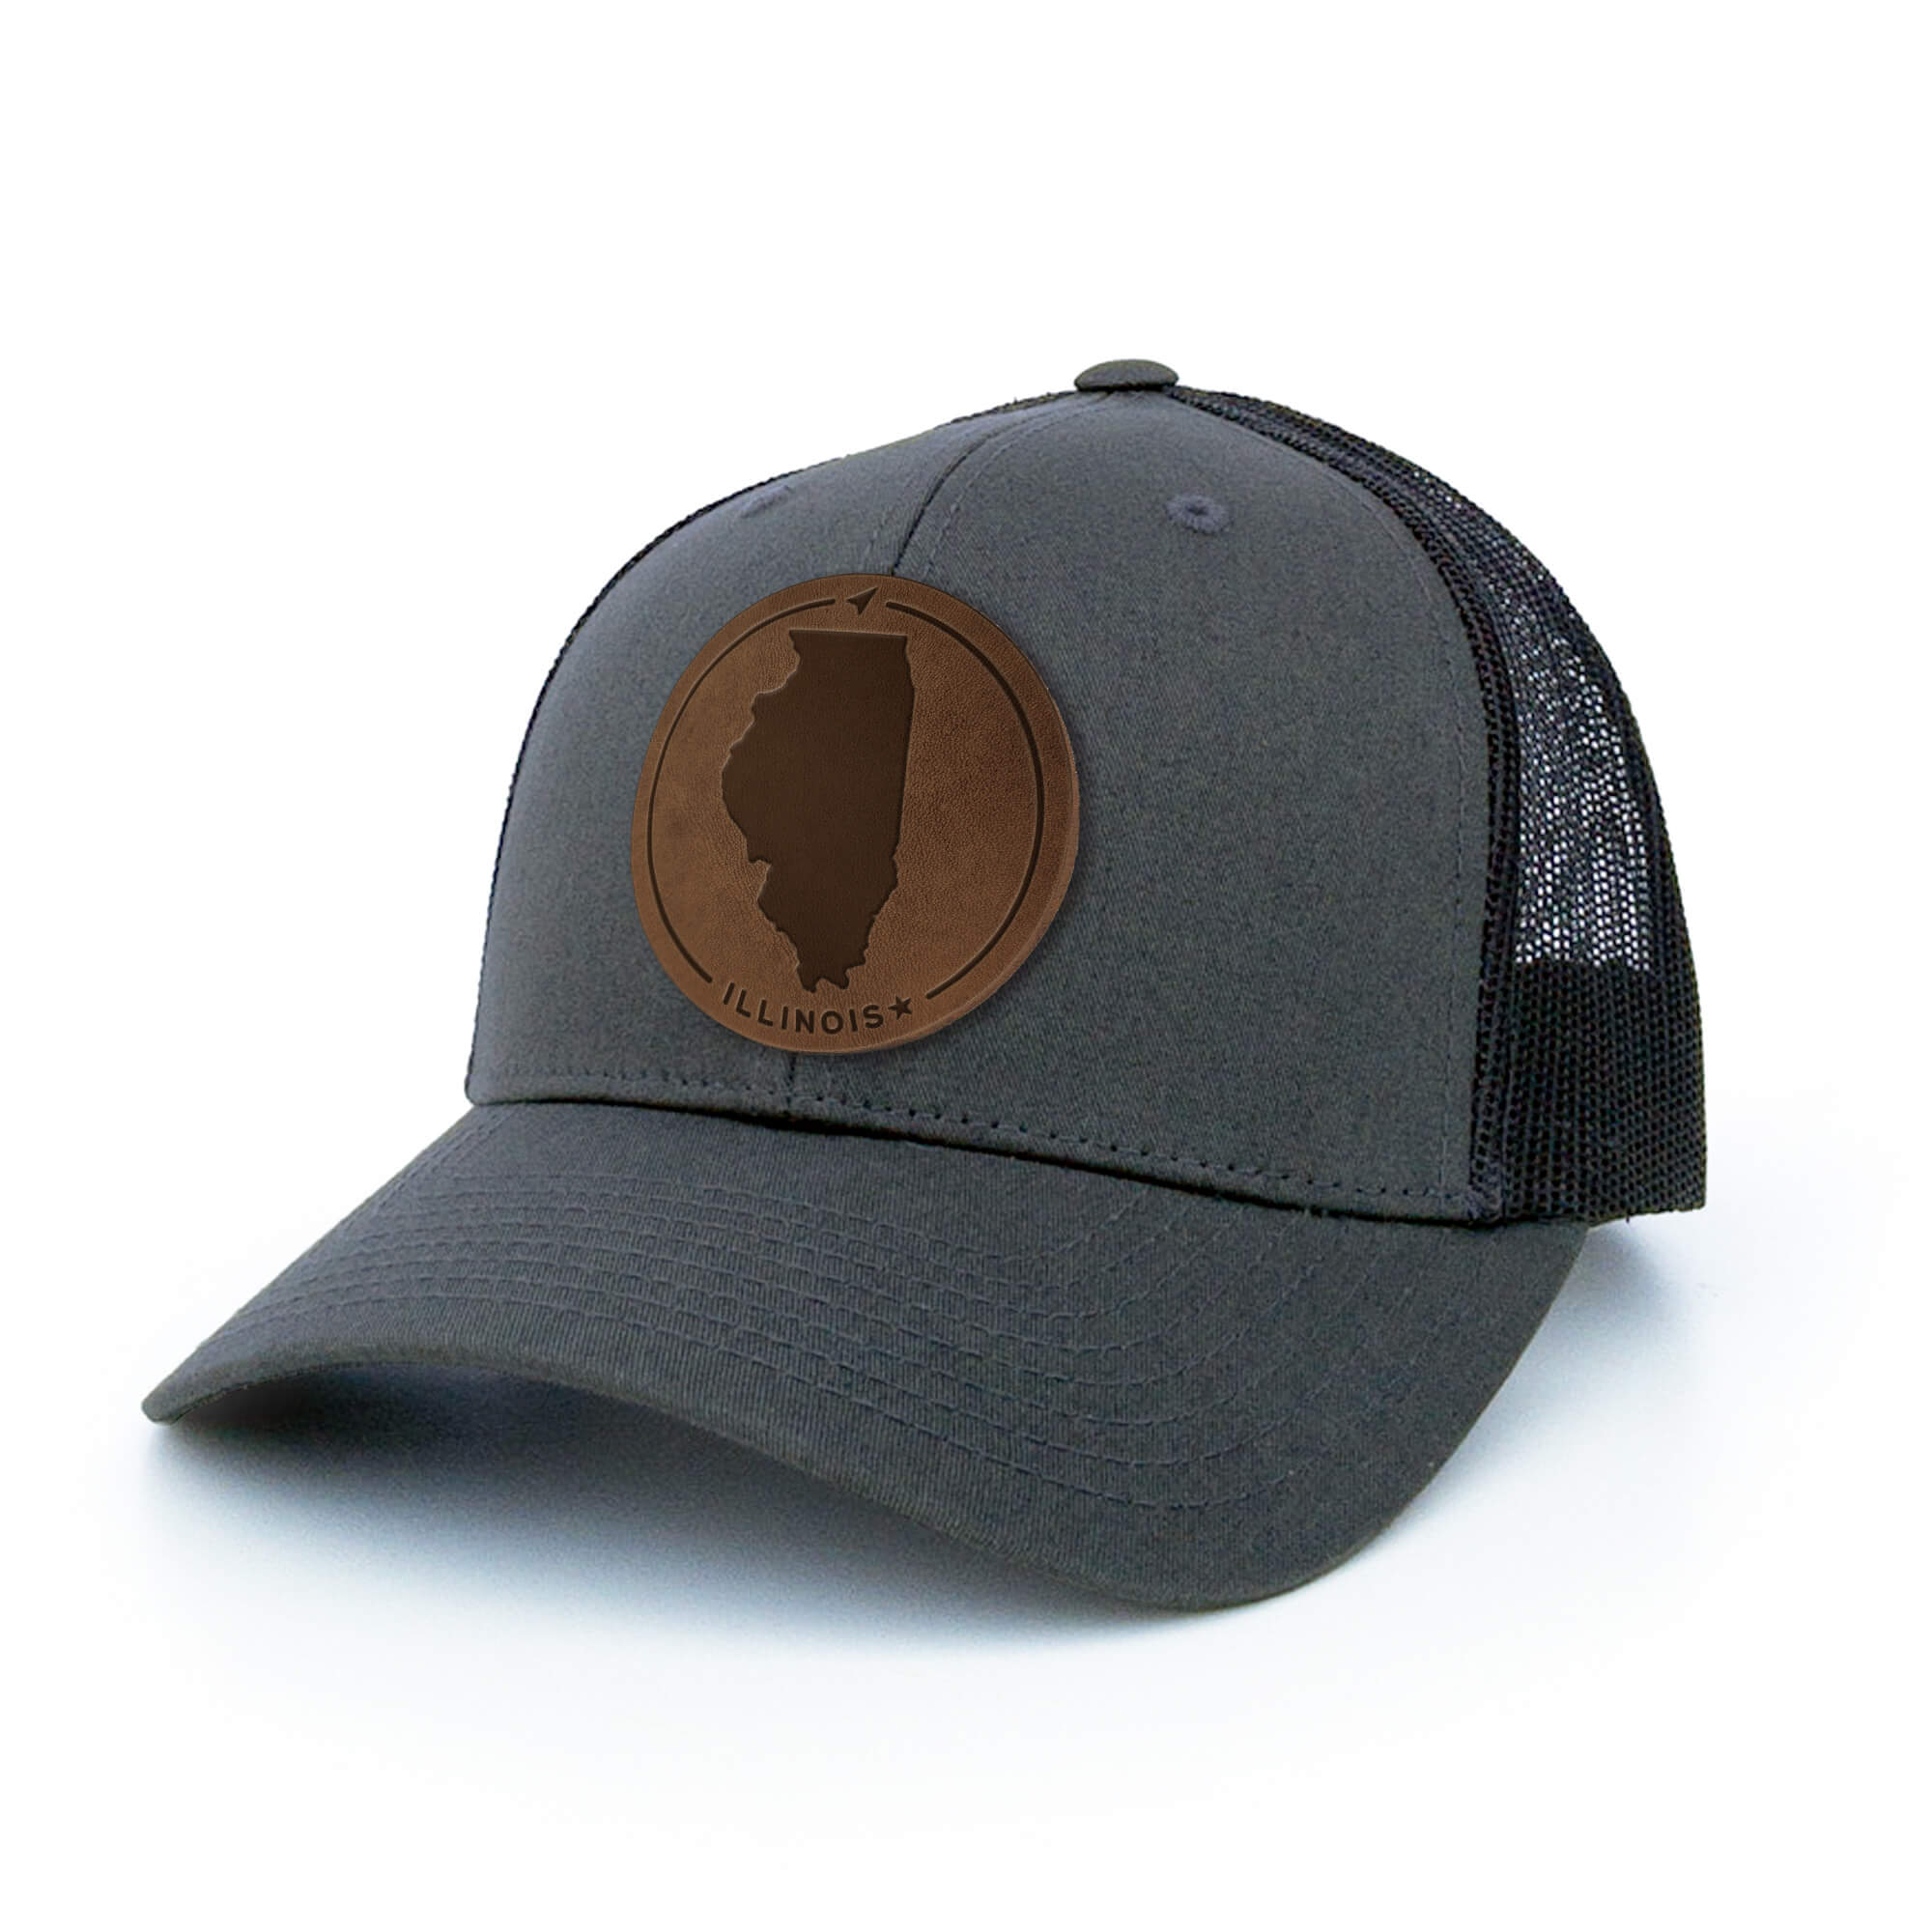 Charcoal trucker hat with full-grain leather patch of Illinois | BLACK-003-008, CHARC-003-008, NAVY-003-008, HGREY-003-008, MOSS-003-008, BROWN-003-008